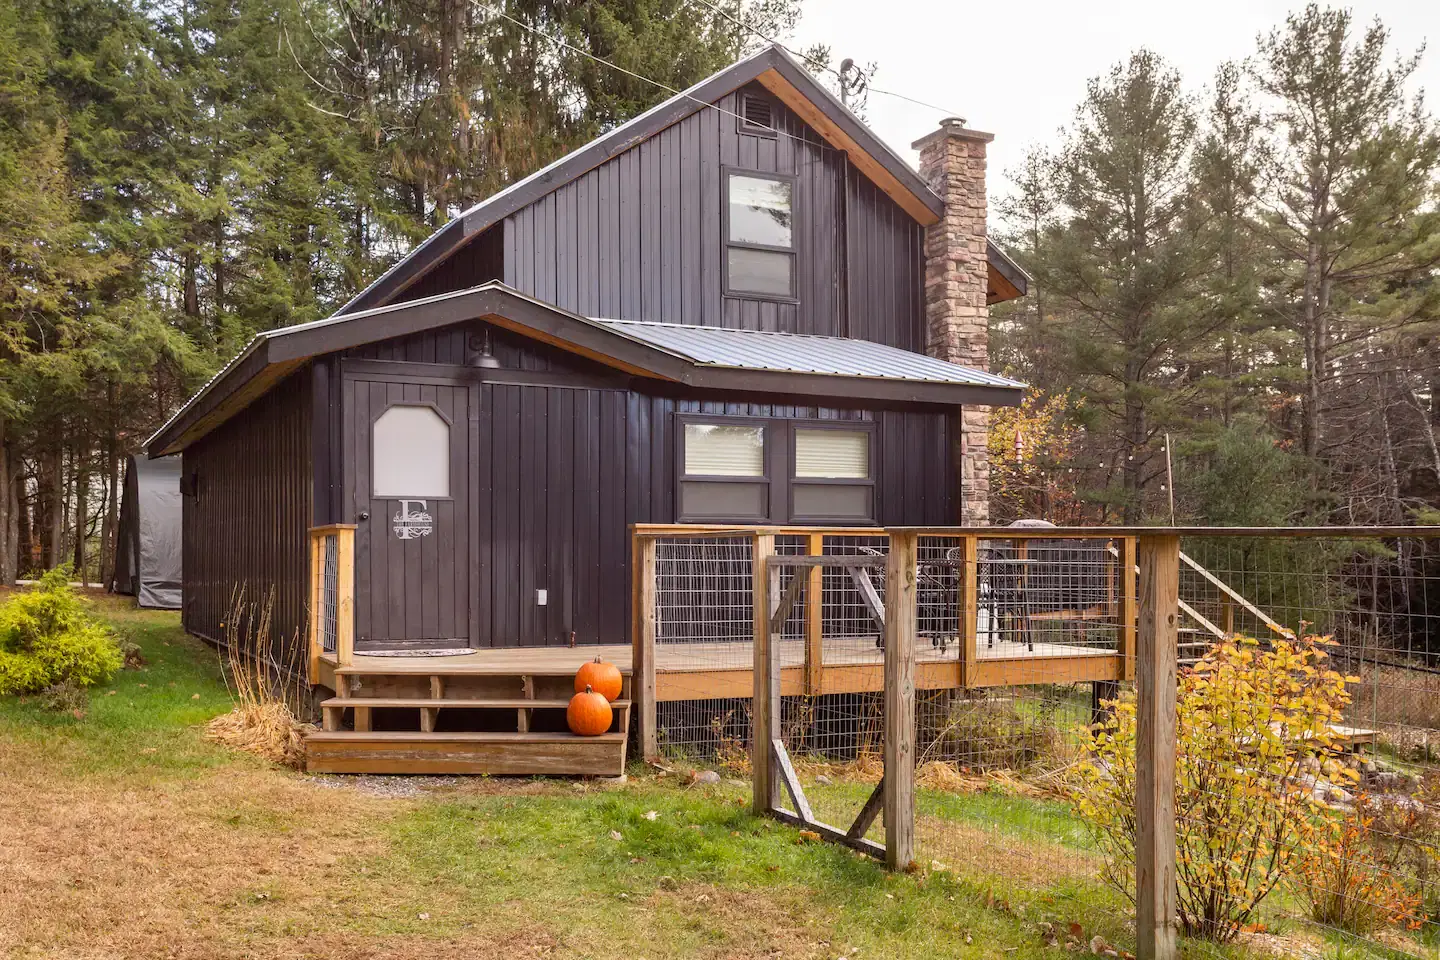 A black two-story cabin with a metal roof stands surrounded by trees.